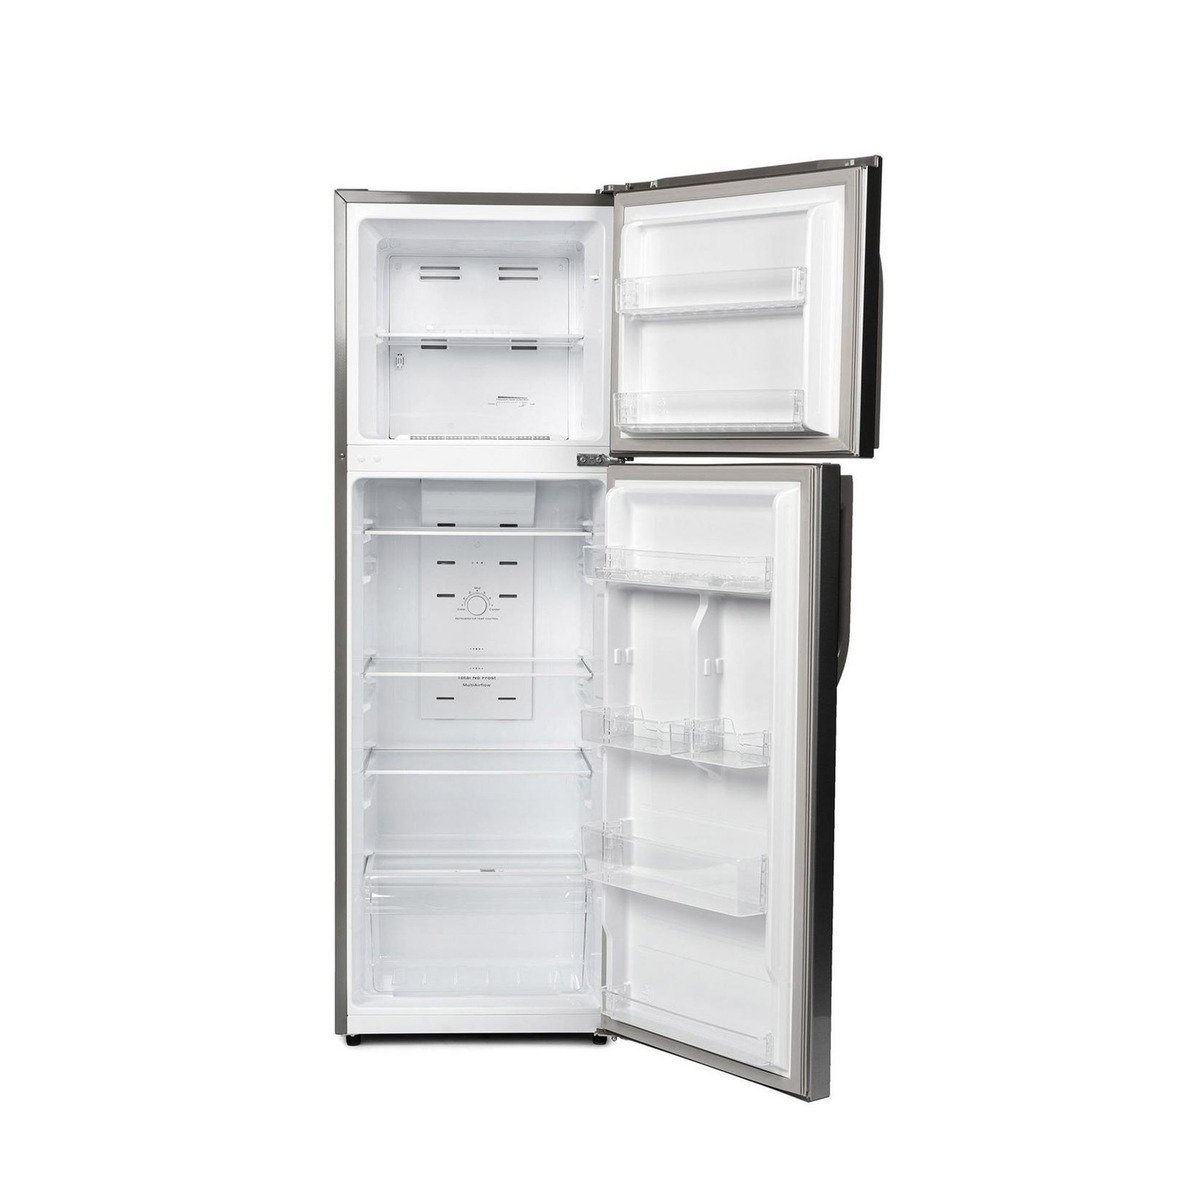 White Westing House Double Door Refrigerator WWR 9KS251 250 LTR